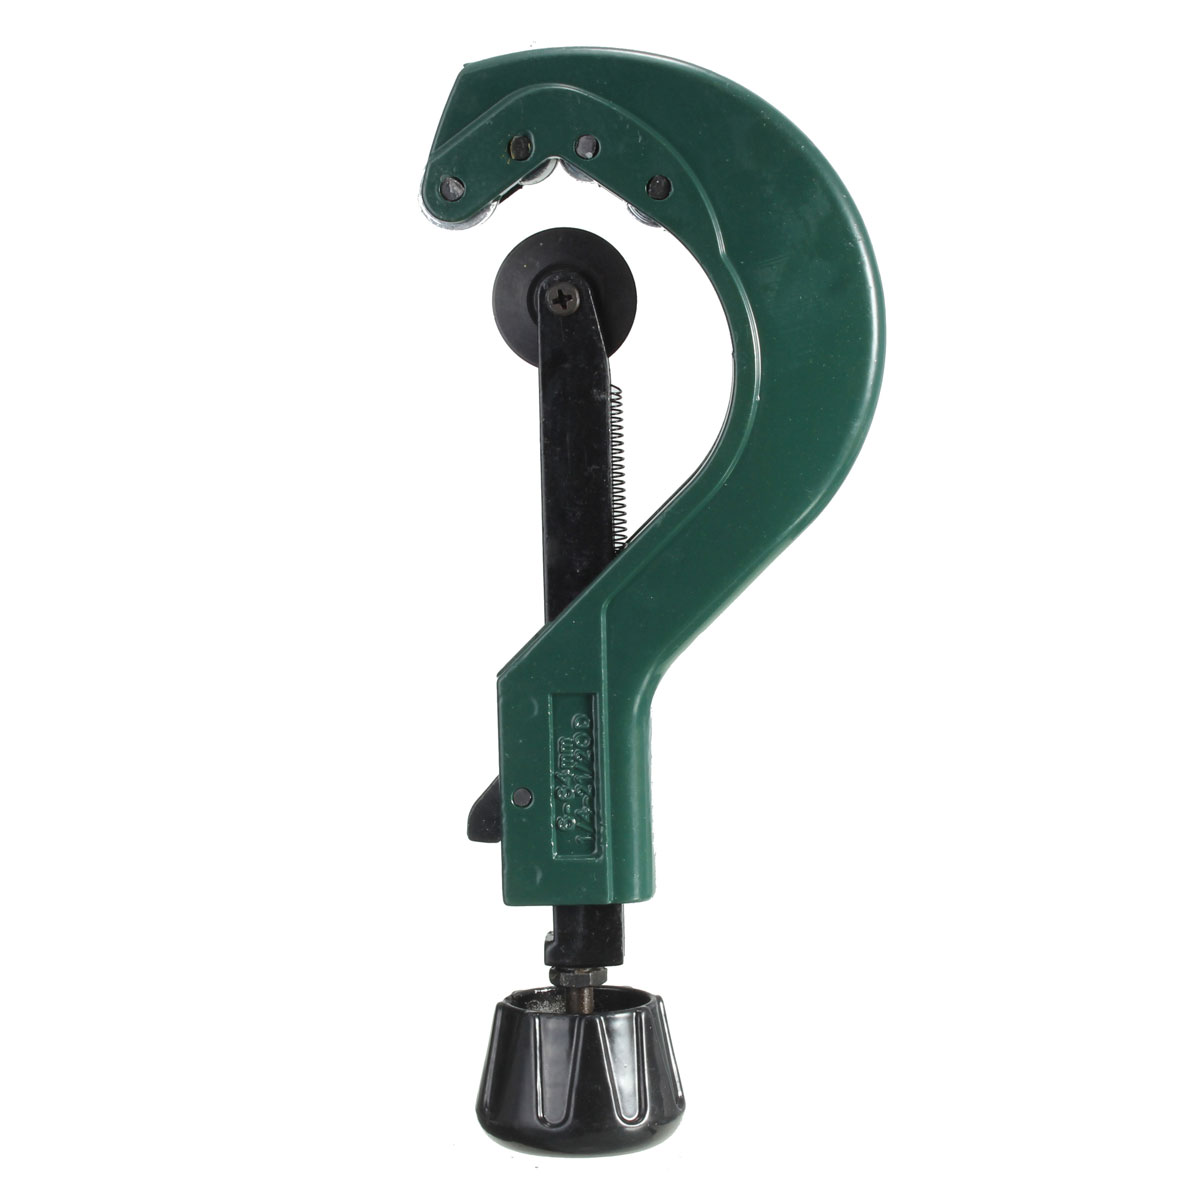 6-64mm-Heavy-Duty-Silverline-Plumbers-Quick-Release-Tube-Pipe-Cutter-Tool-1041481-1